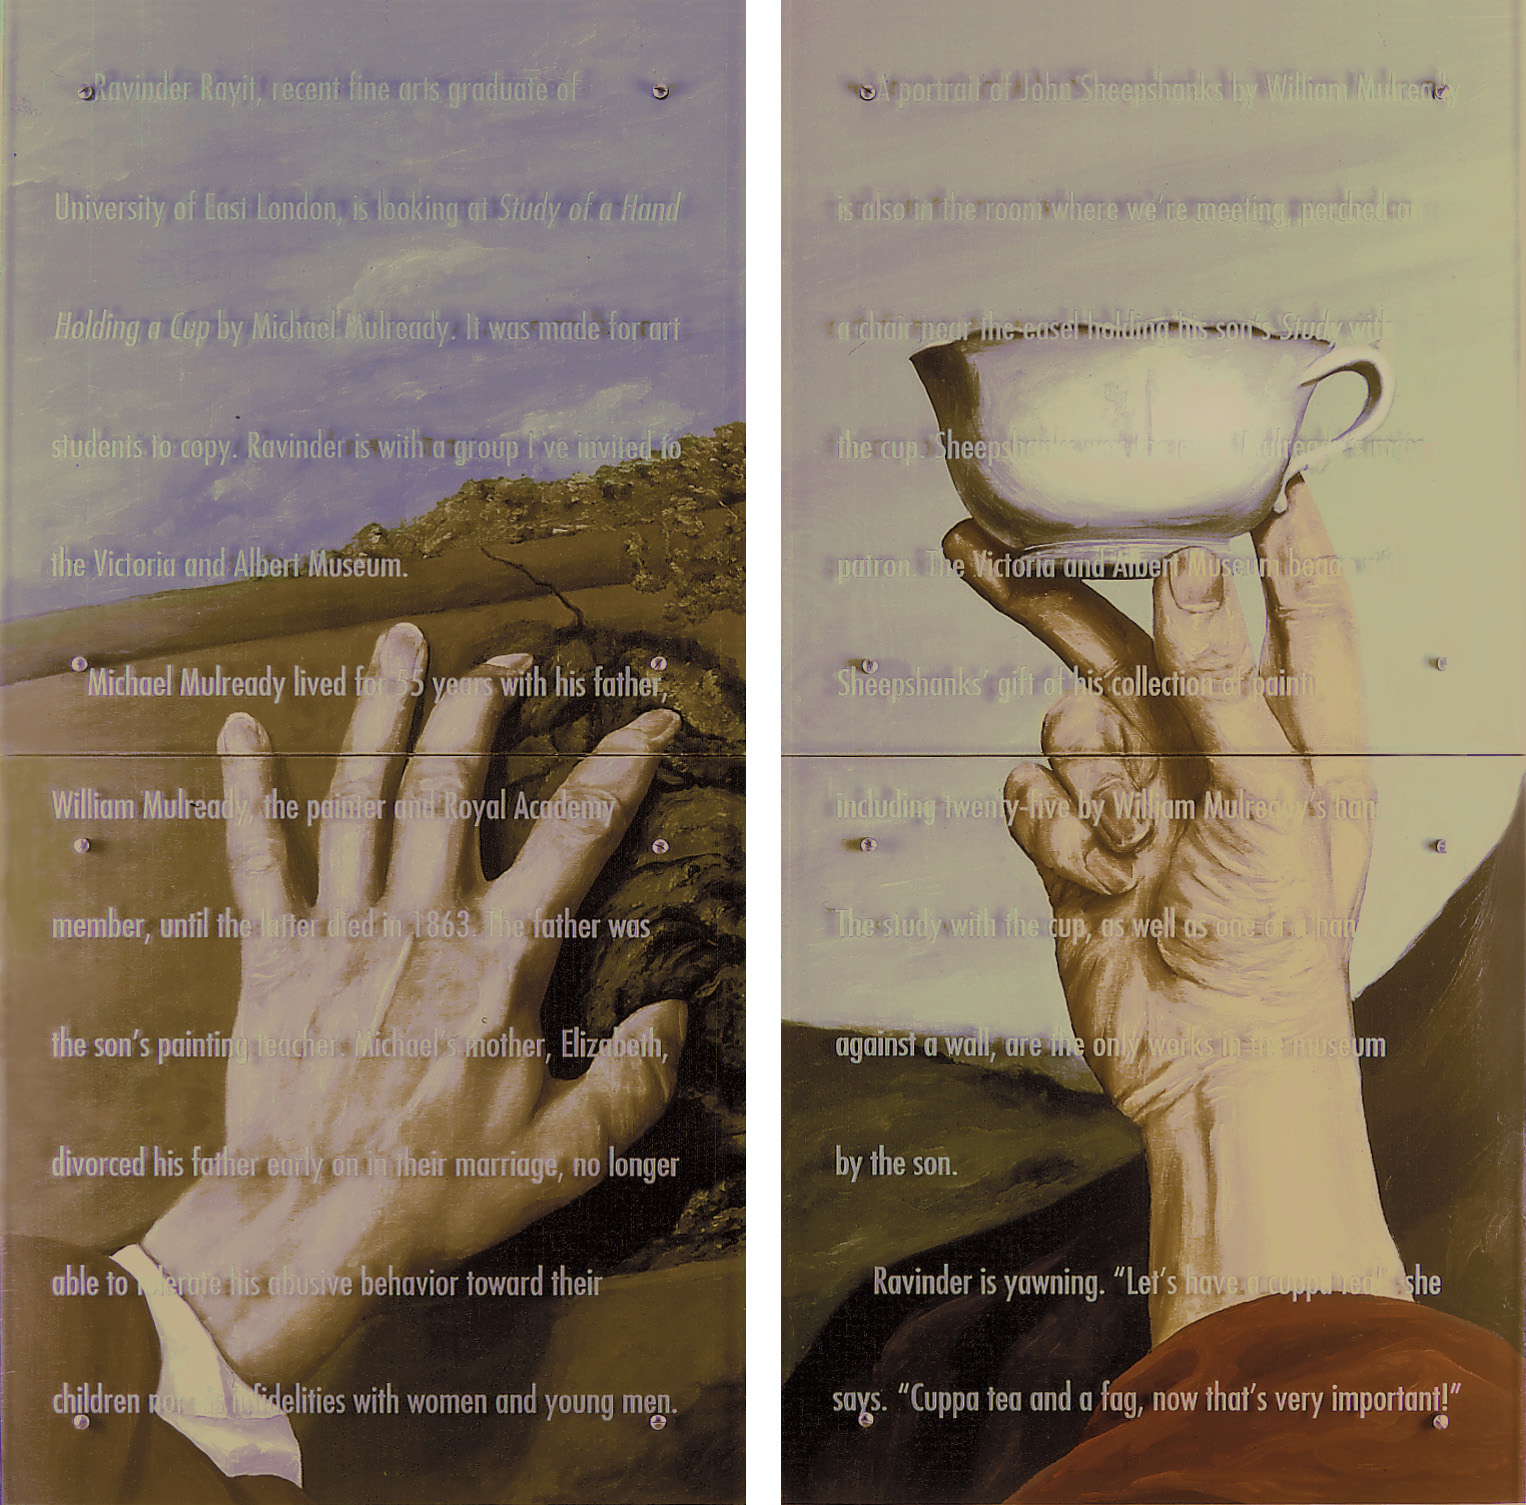 Made to copy, 60" x 60" (153cm x 153cm), four panels, oil/wood, sandblasted glass, bolts After Michael Mulready (both), Study of a Hand Holding a Cup, V&A , London Study of a Hand Against a Wall, V&A, London Text: Ravinder Rayit, recent fine arts graduate of University of East London, is looking at Study of a Hand Holding a Cup by Michael Mulready. It was made for art students to copy. Ravinder is with a group I've invited to the Victoria and Albert Museum. Michael Mulready lived for 55 years with his father, William Mulready, the painter and Royal Academy member, until the latter died in 1863. The father was the son's painting teacher. Michael's mother, Elizabeth, divorced his father early on in their marriage, no longer able to tolerate his abusive behavior toward their children nor his infidelities with women and young men. A portrait of John Sheepshanks by William Mulready is also in the room where we're meeting, perched on a chair near the easel holding his son's Study with the cup. Sheepshanks was the elder Mulready's major patron. The Victoria and Albert Museum began with Sheepshanks gift of his collection of paintings, including twenty-five by William Mulready's hand. The study with the cup, as well as one of a hand against a wall, are the only works in the museum by the son. Ravinder is yawning. "Let's have a cuppa tea!" she says. "Cuppa tea and a fag, now that's very important!"